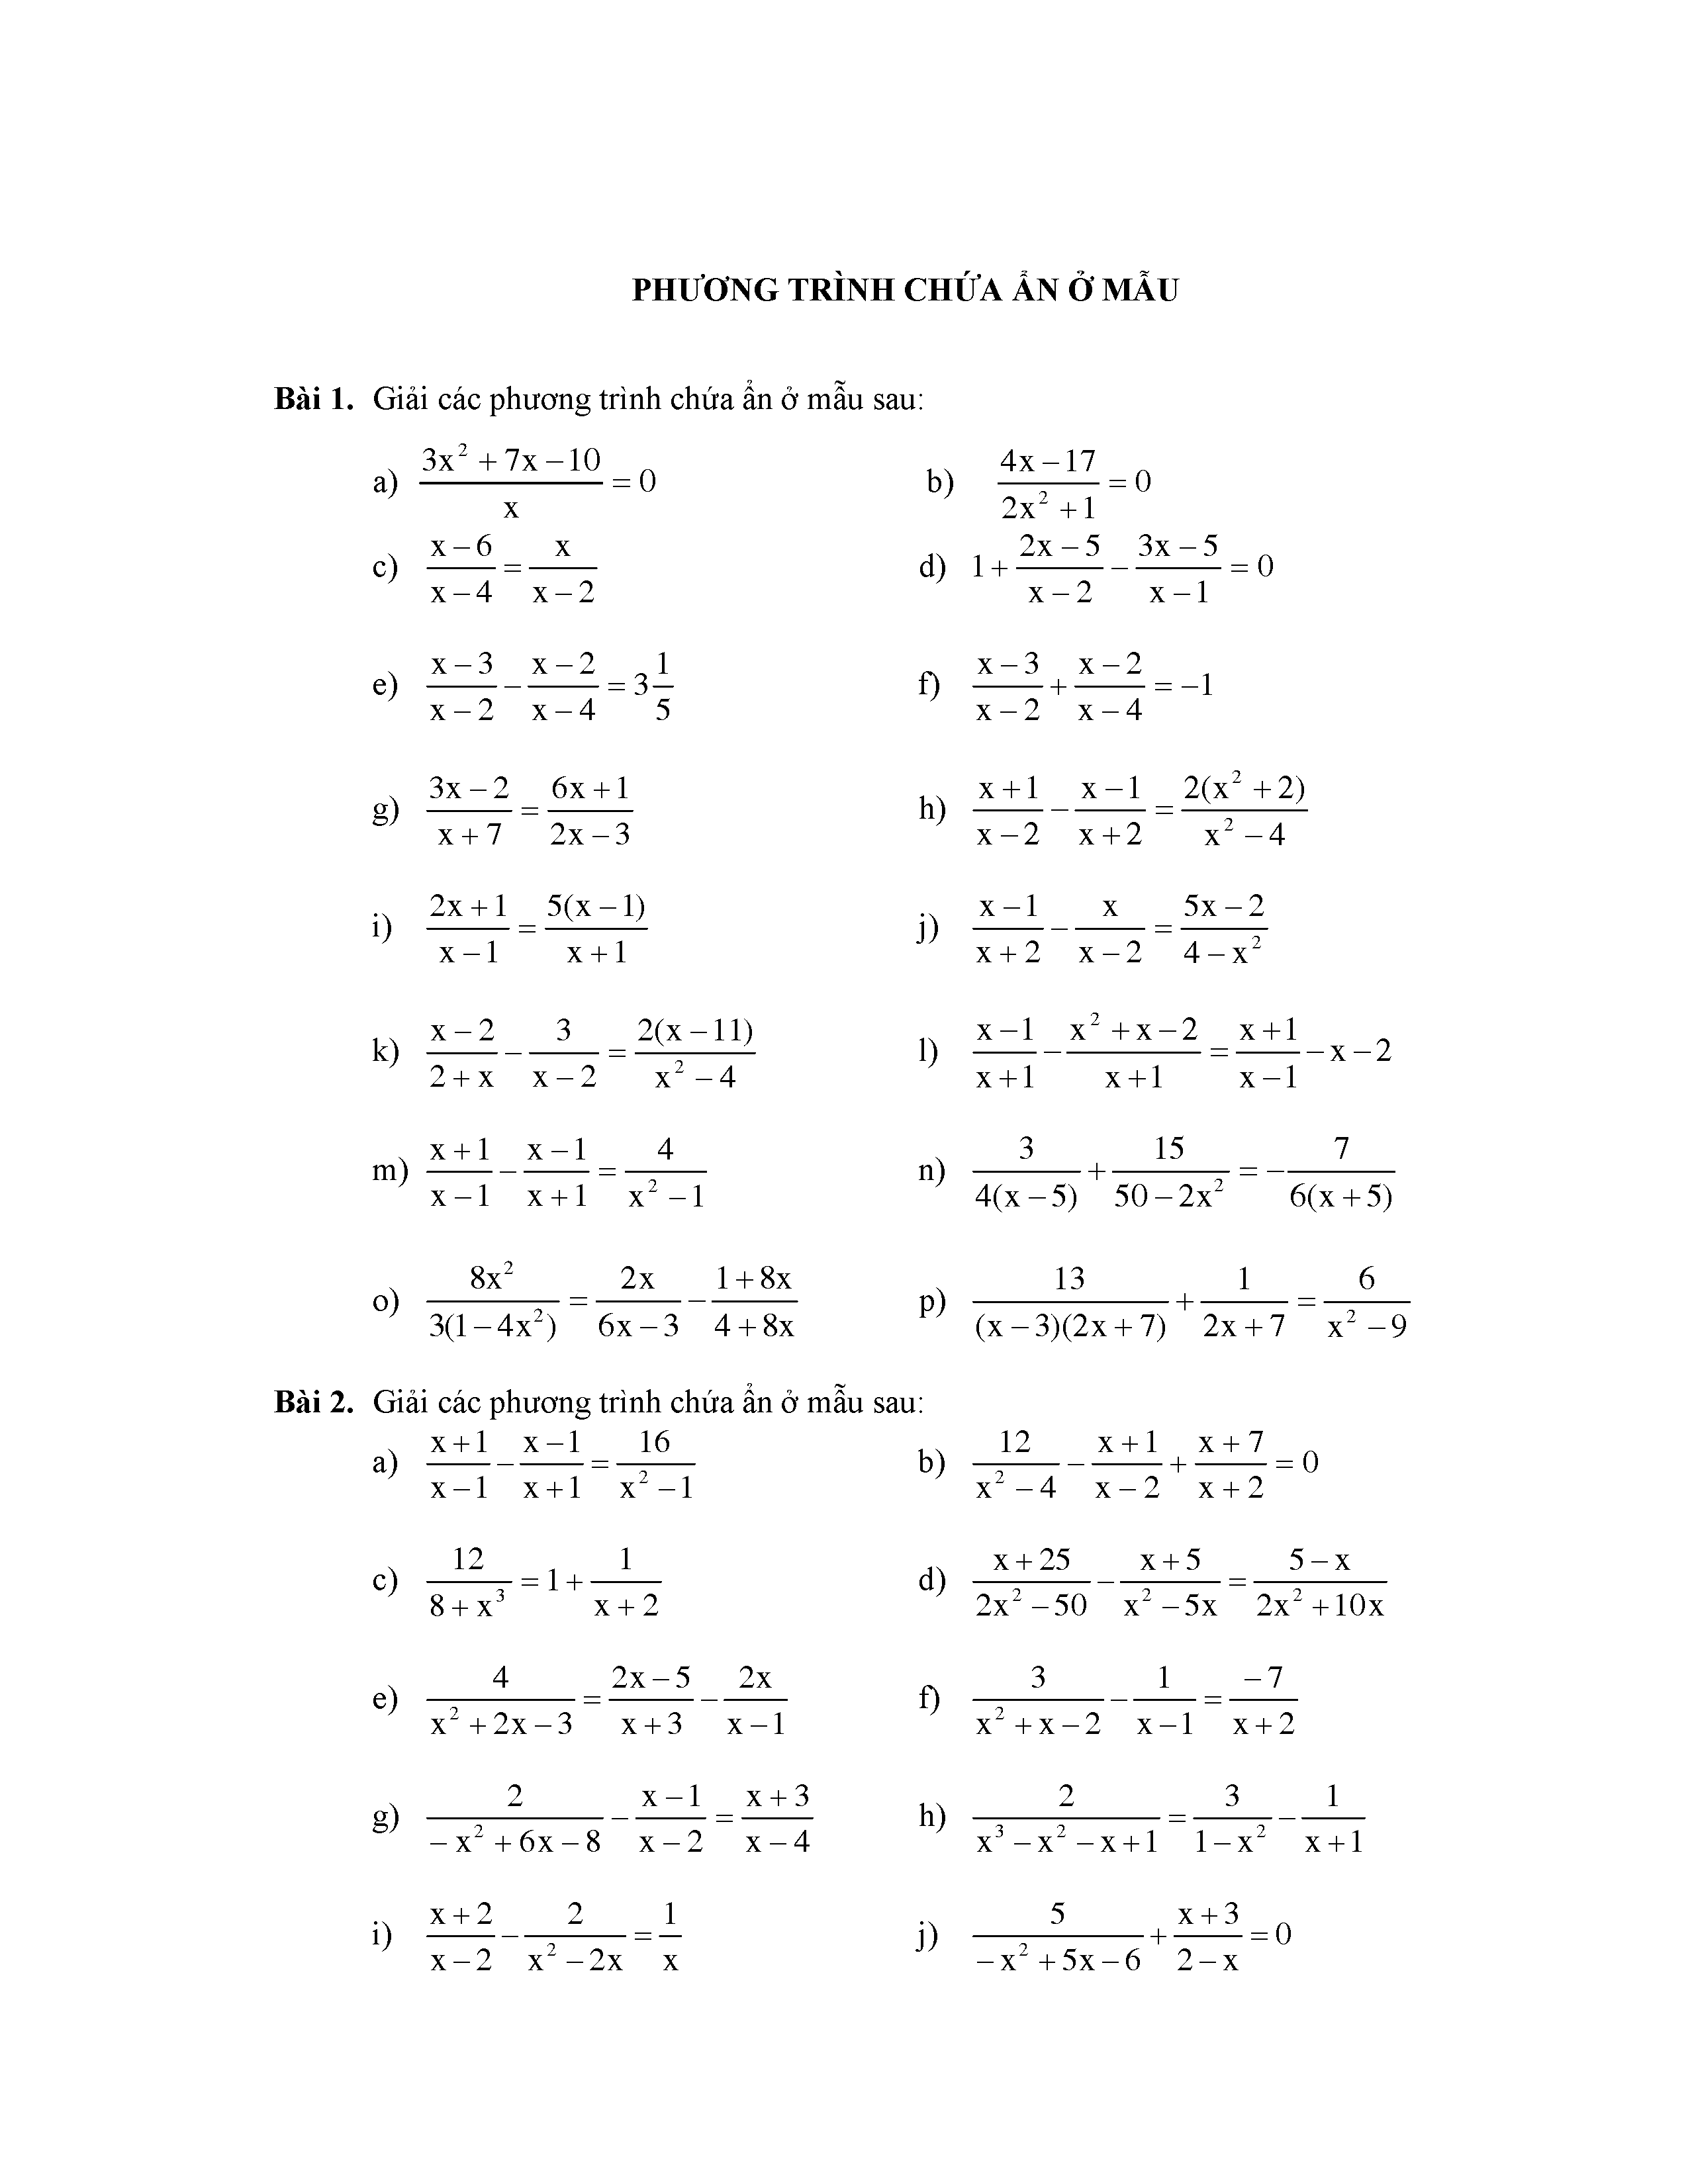 What are some examples of exercises related to equations containing variables in the denominator?